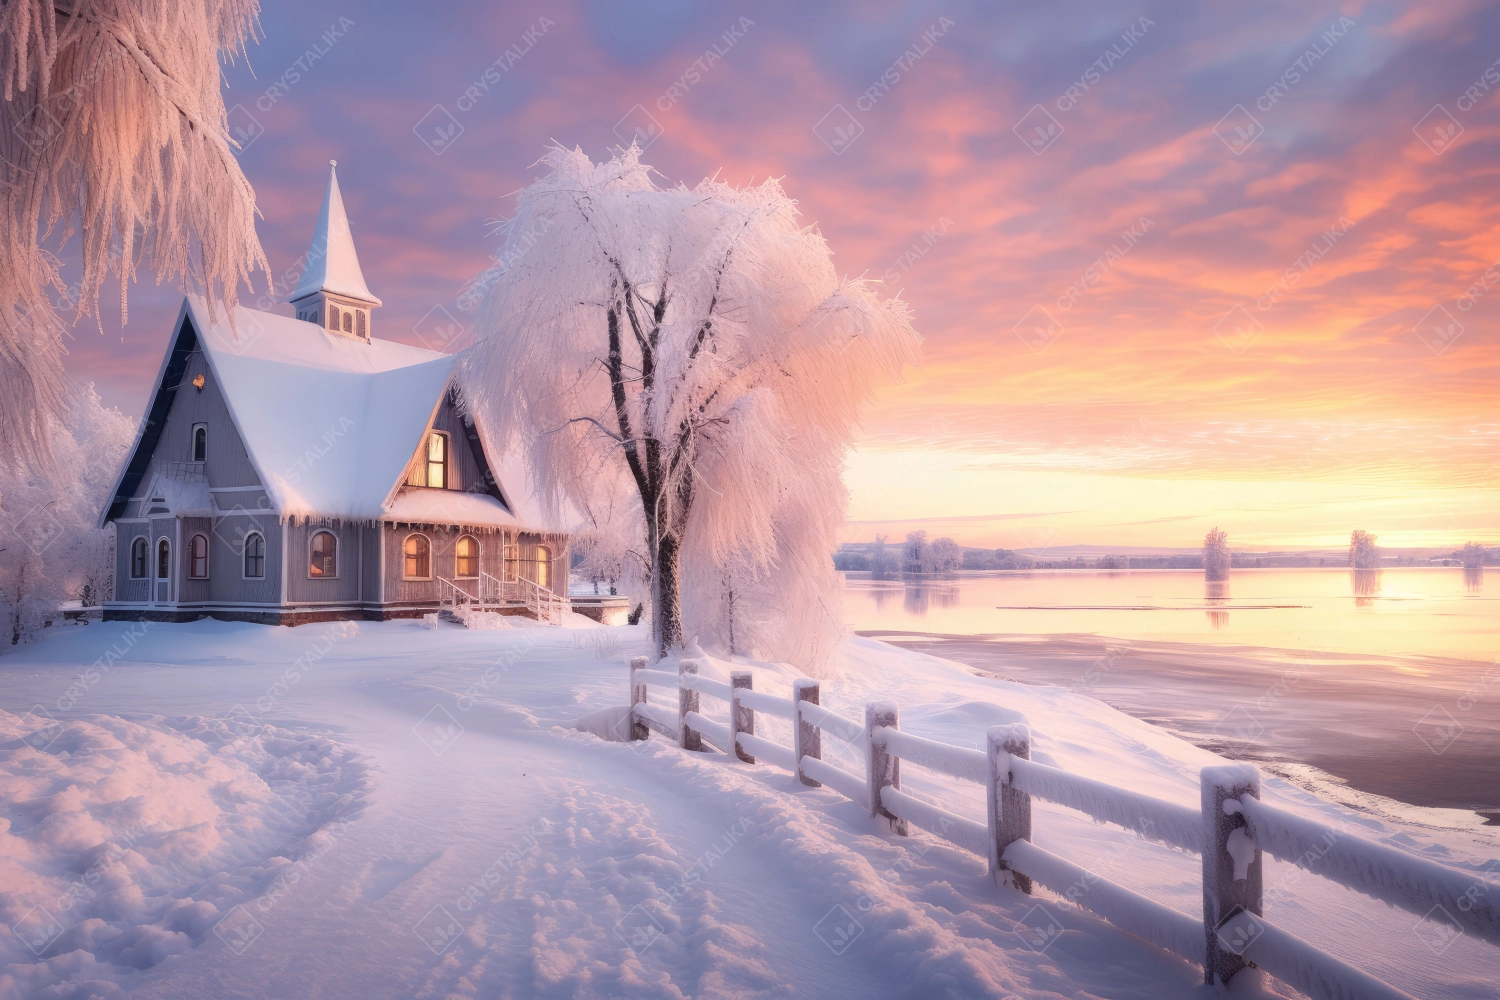 Small old wooden church in winter